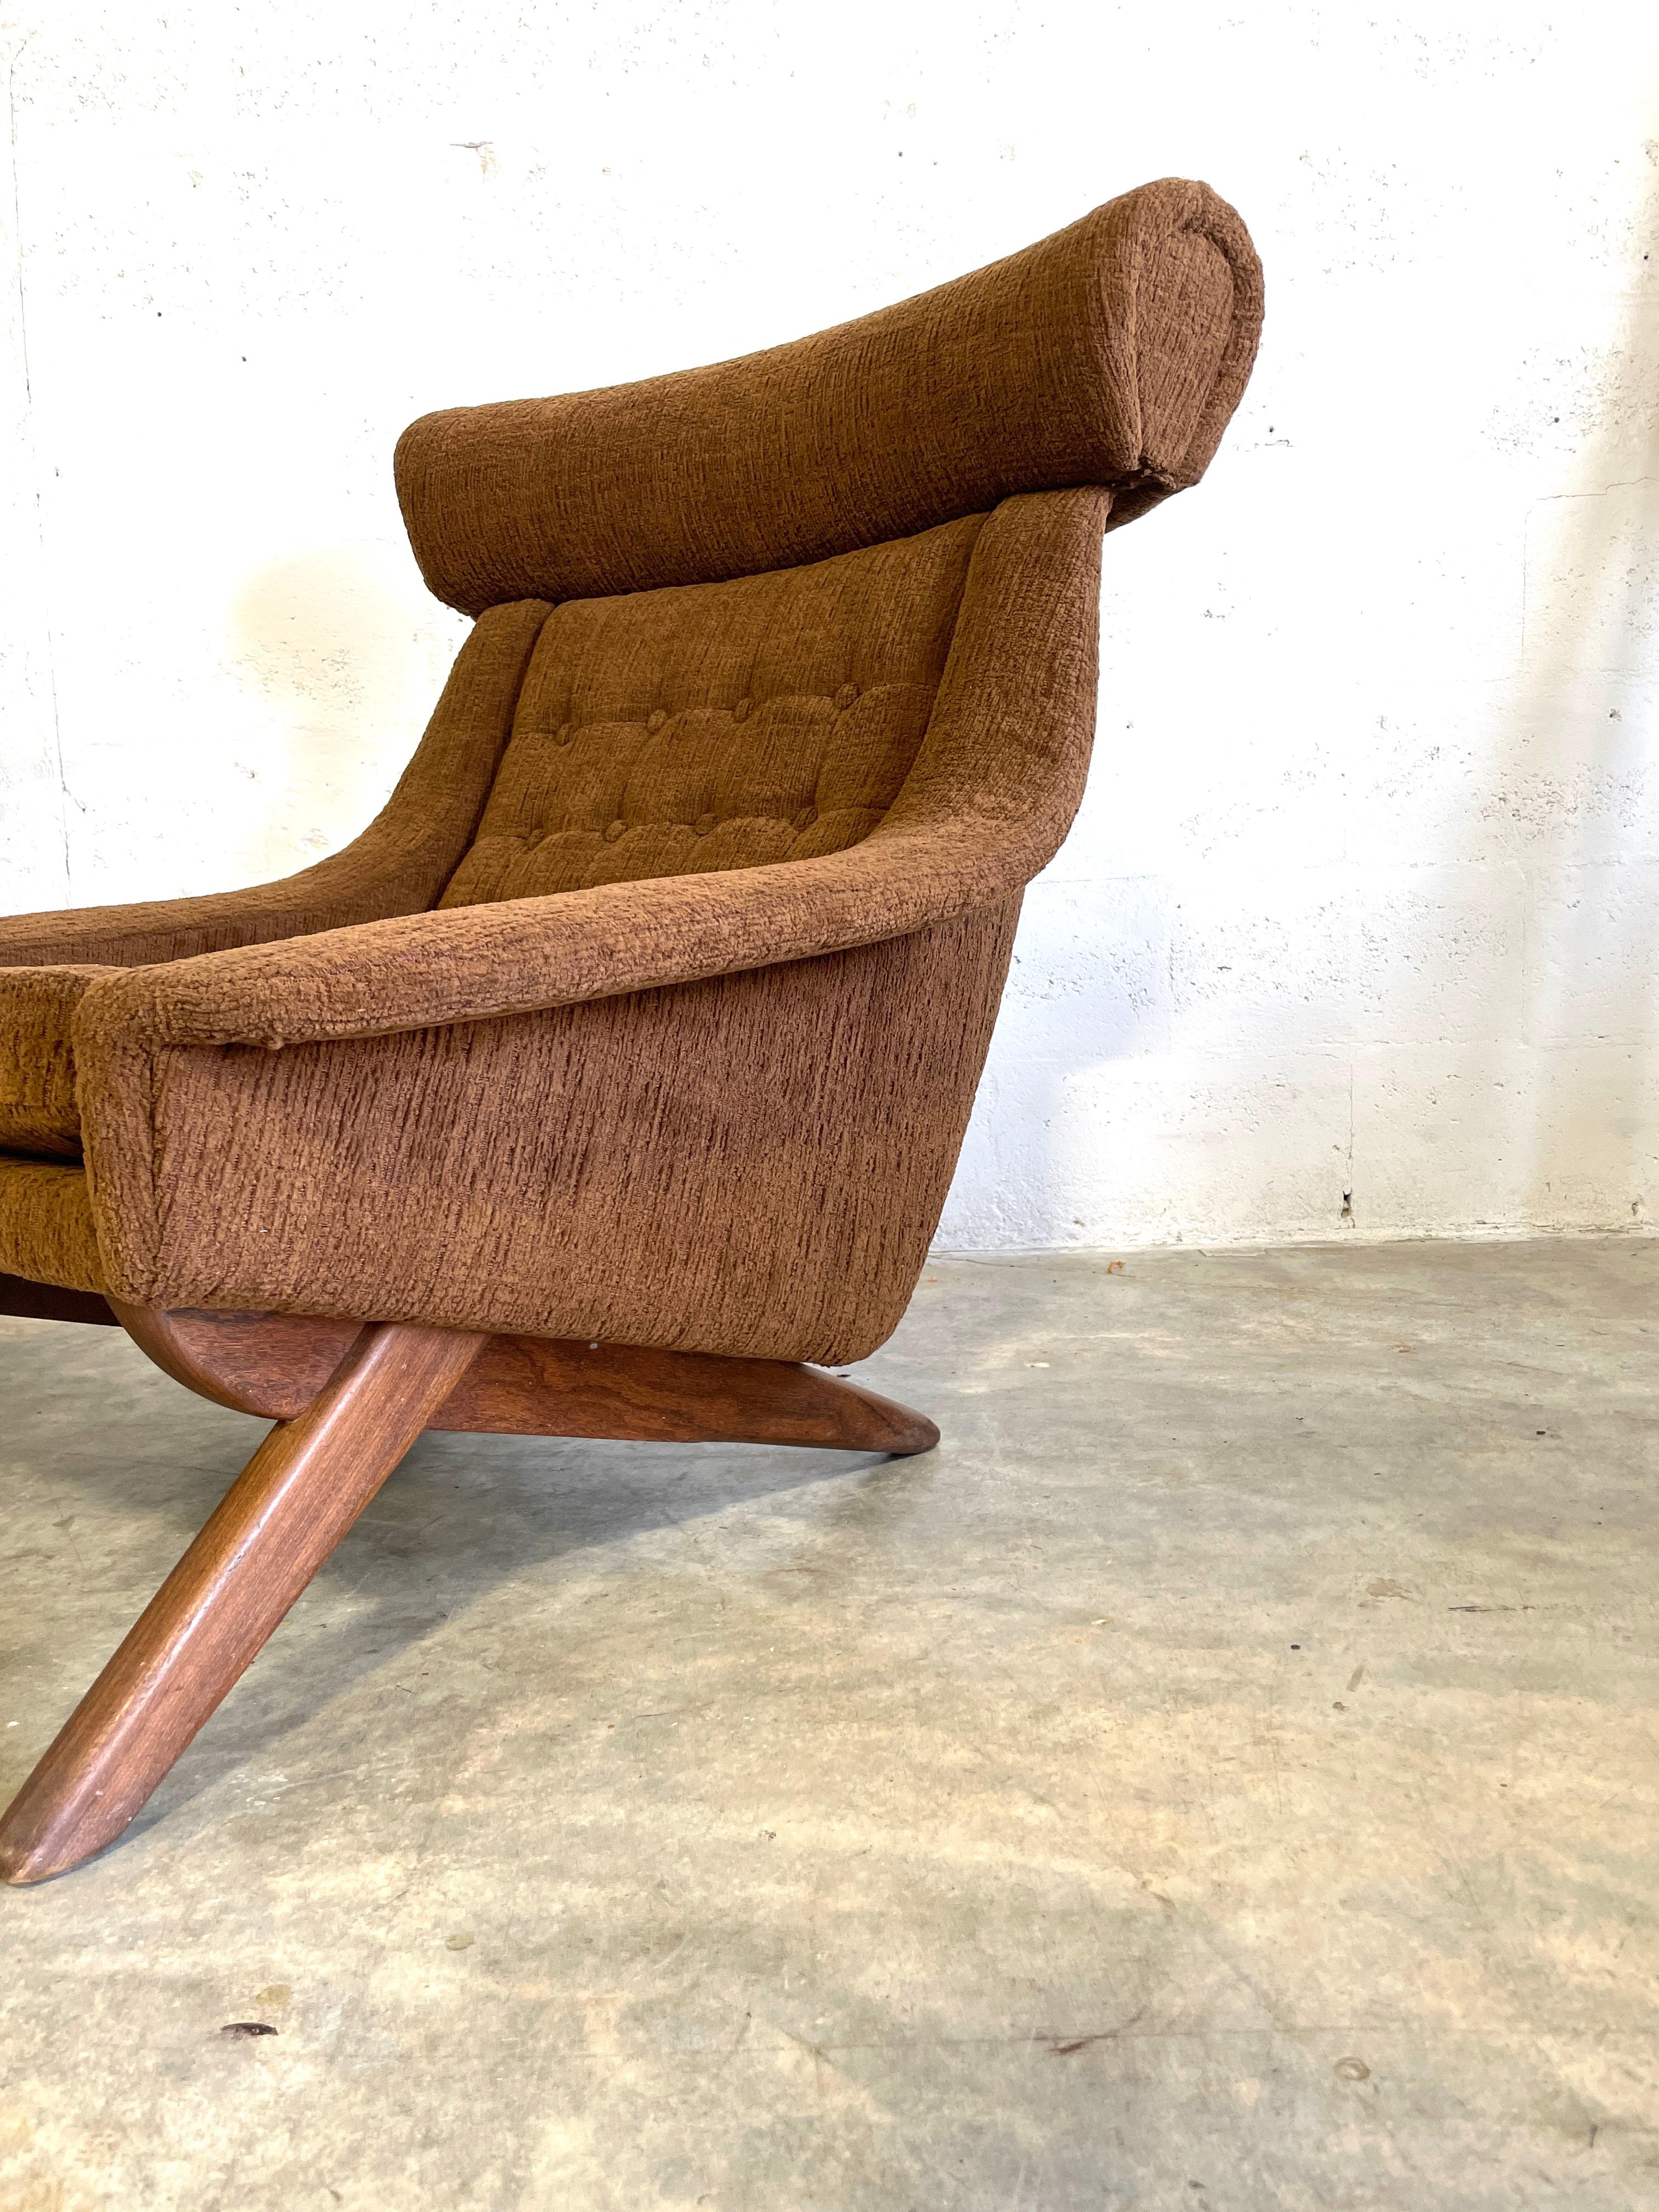 Illum Wikkelso “Ox” Lounge Chair. Recently recovered.